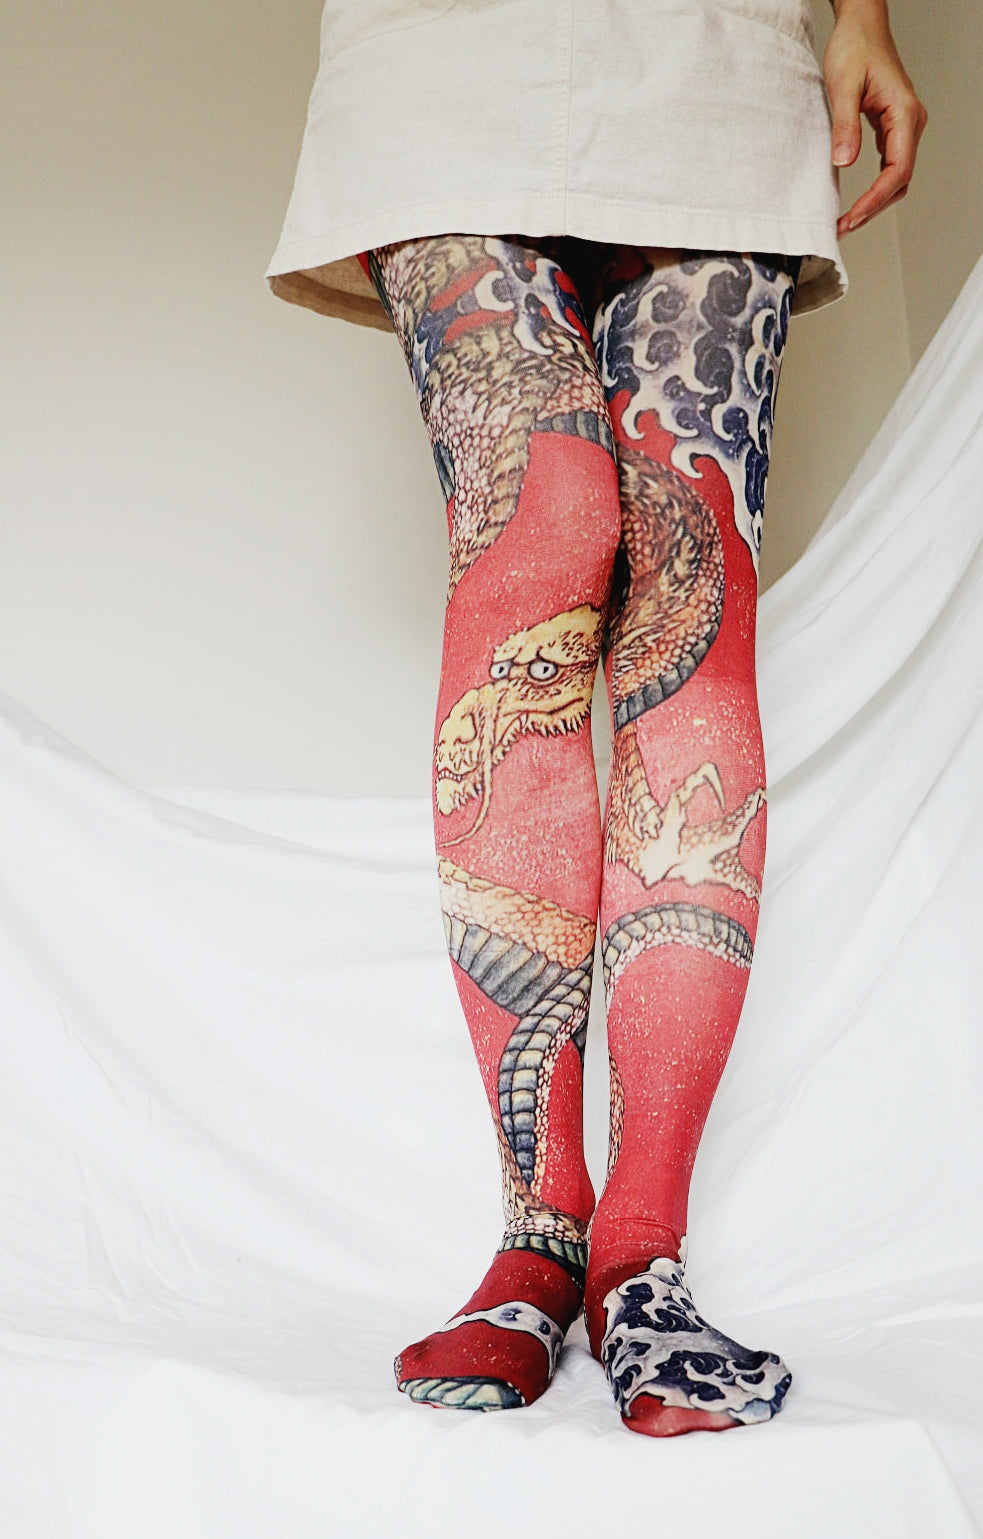 Storong red color. The tights that has a print of Dragon art by Hokusai.